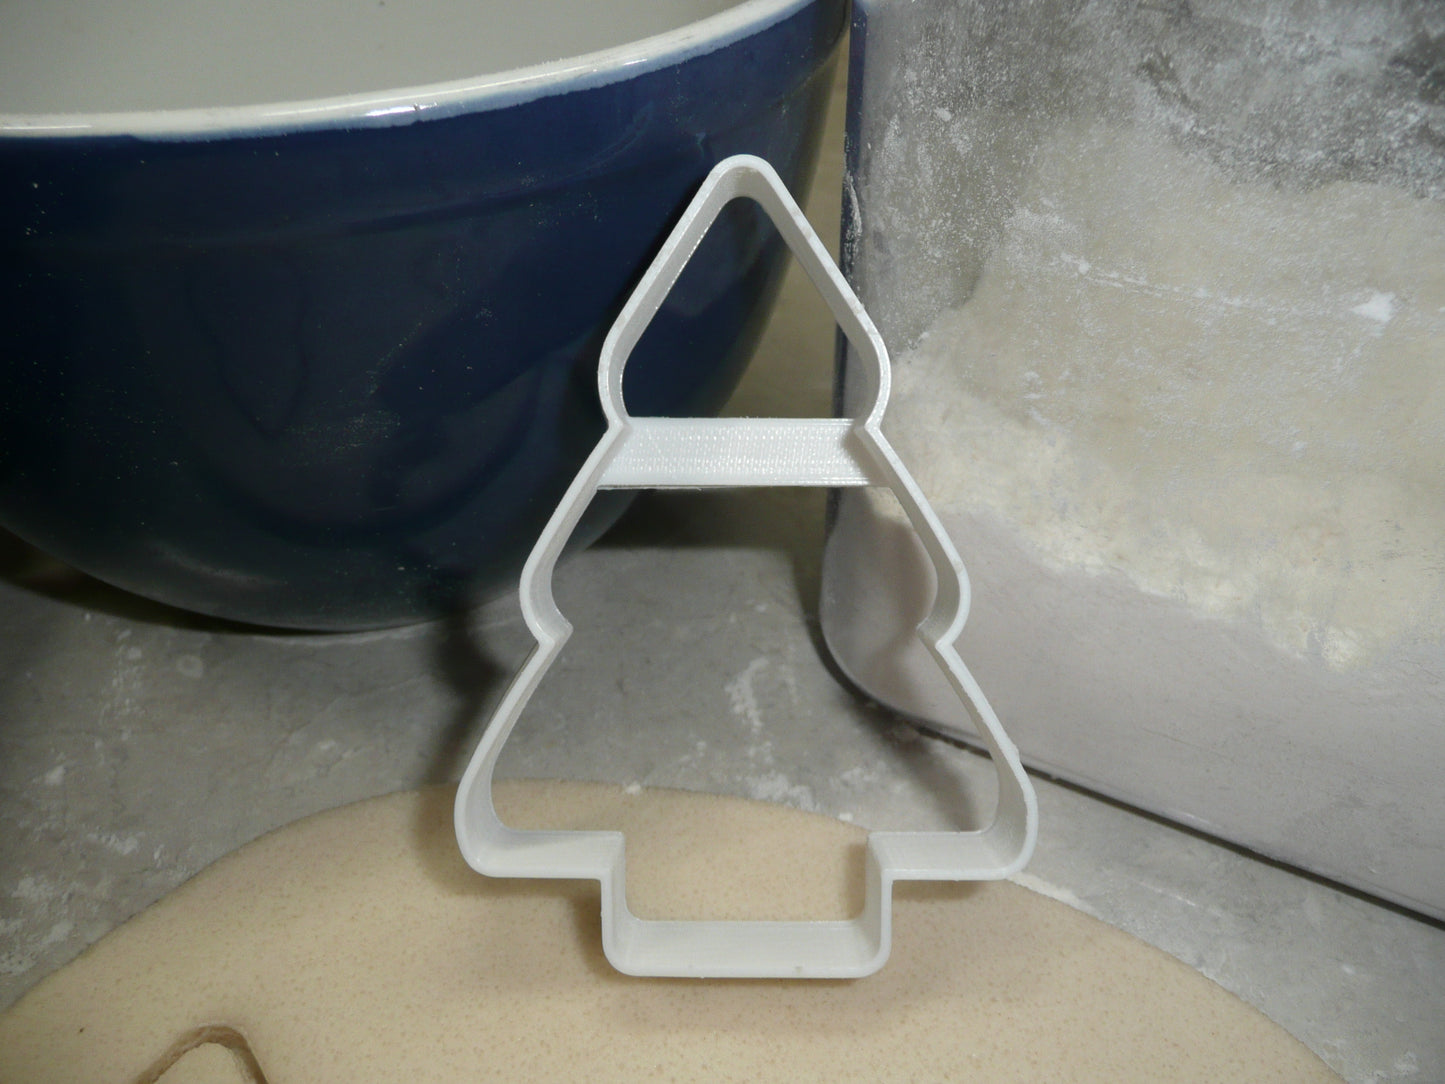 Christmas Tree Snack Cake Shape Outline Cookie Cutter Made In USA PR5116